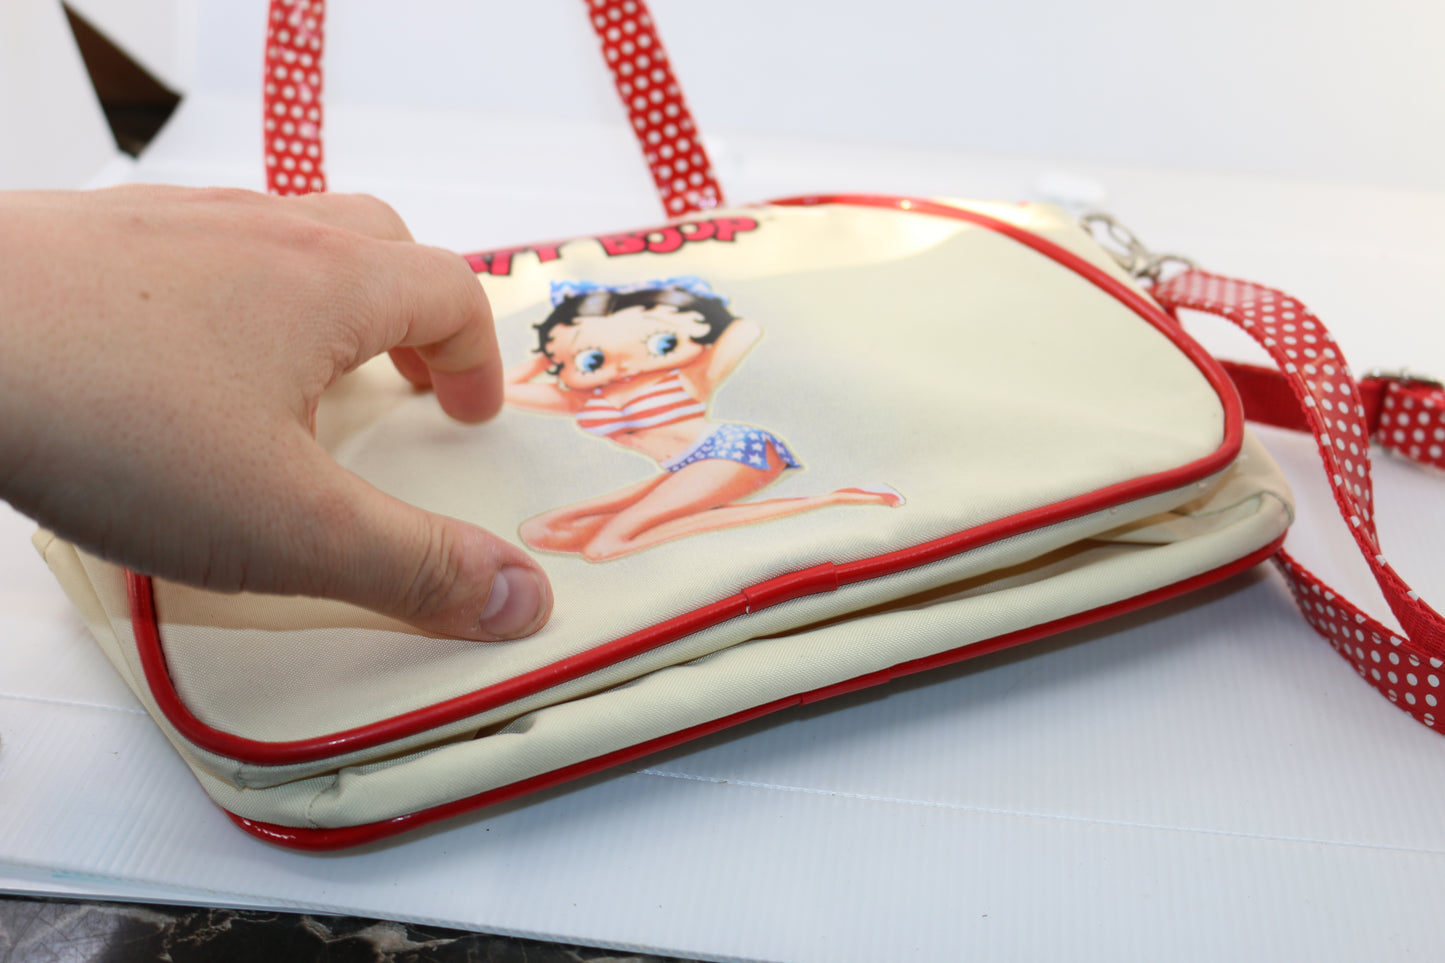 Betty Boop Sassy Handbag From 2003 Rare Collectible Piece! Spotted Side Strap